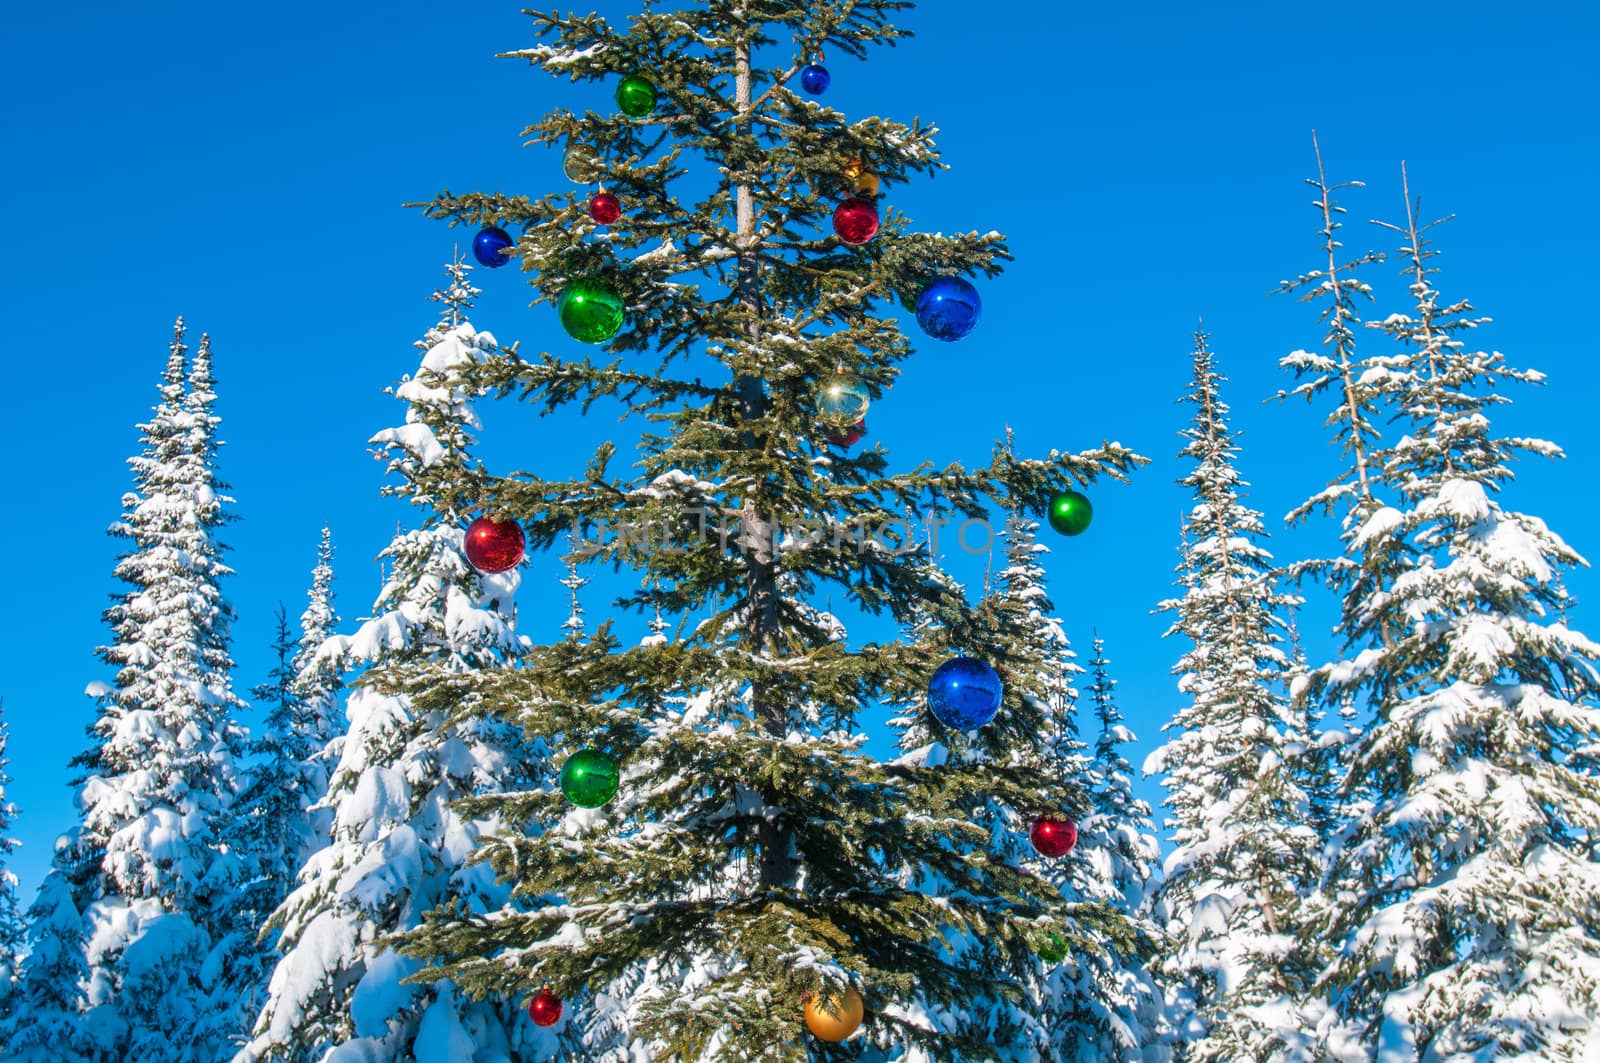 Decorated seasonal tree in a winter forest by edan